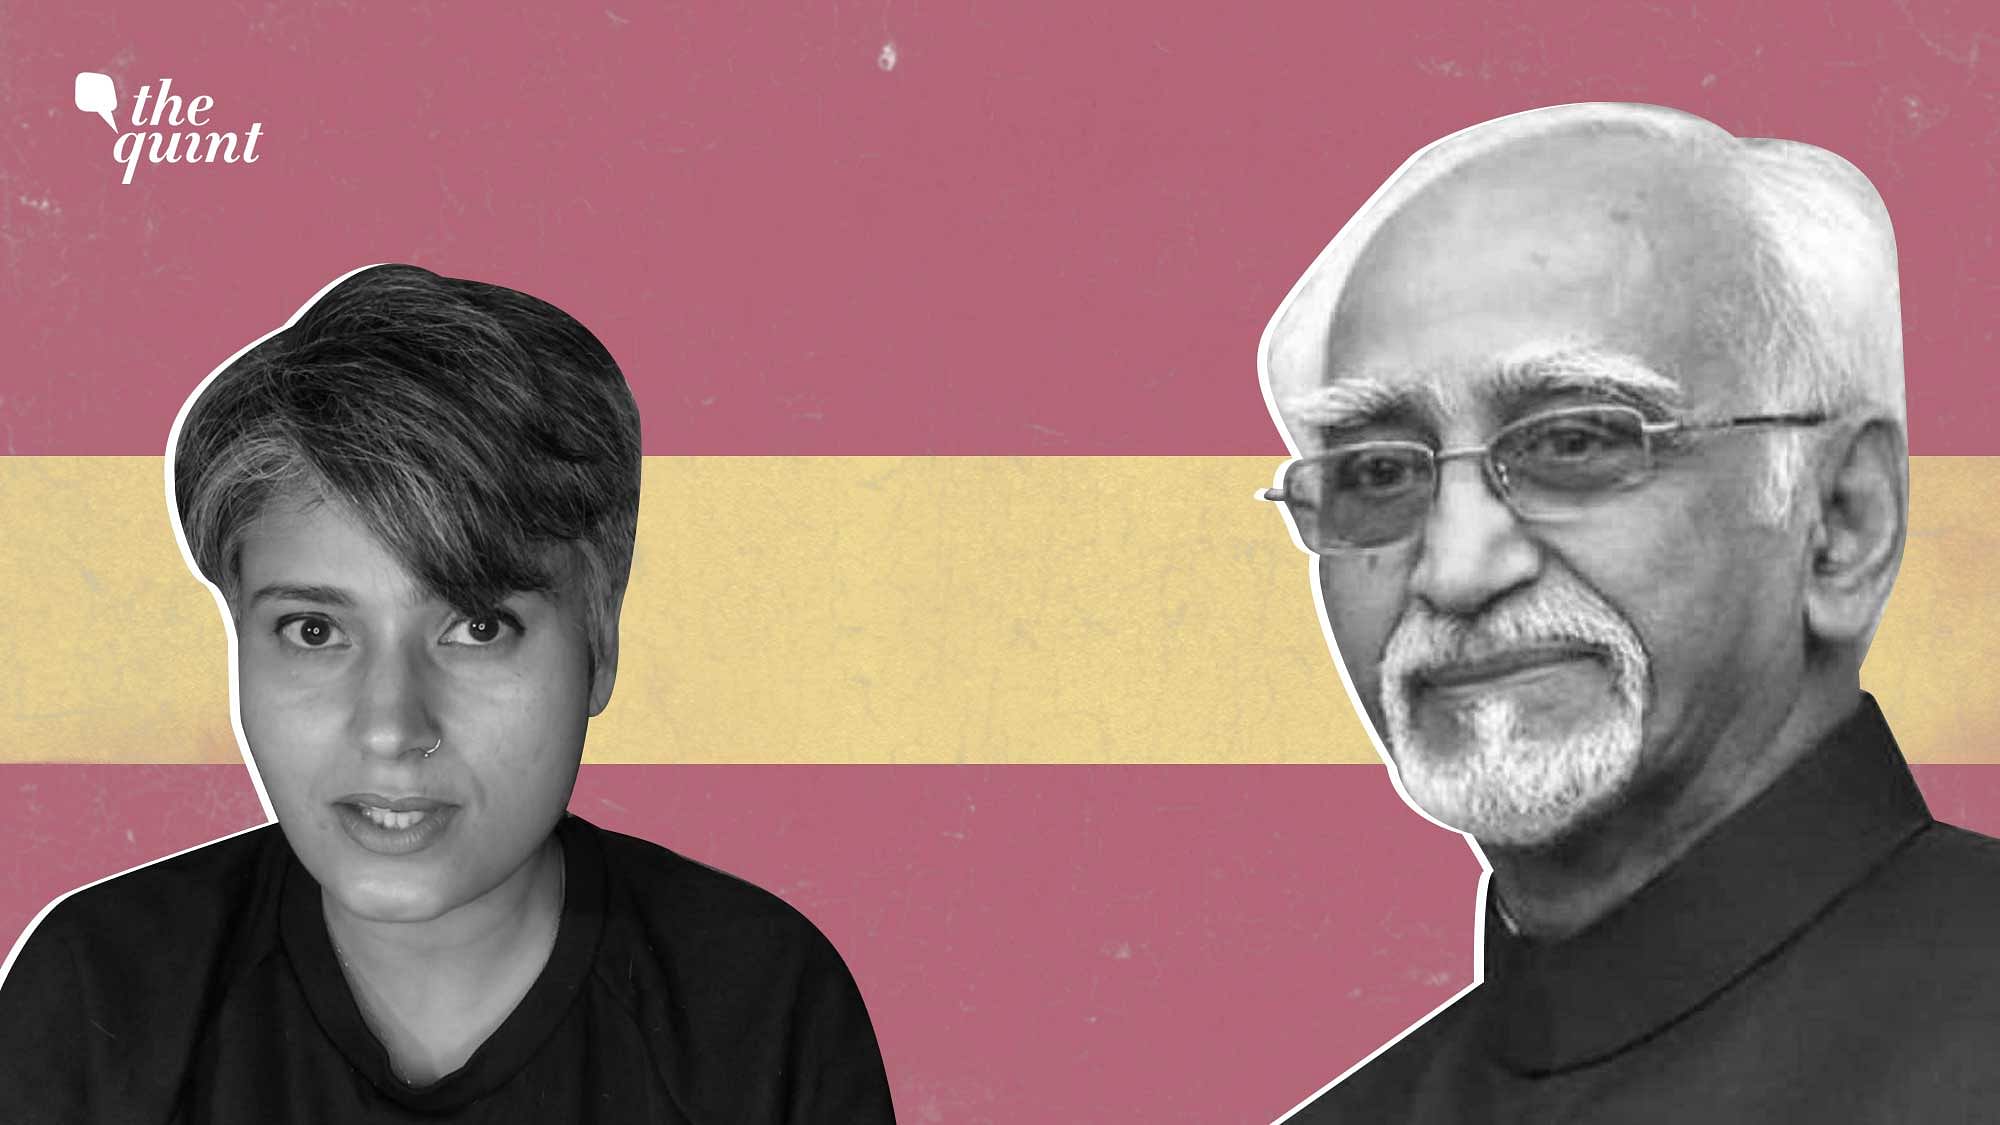 Image of The Quint’s Opinions Editor Nishtha Gautam (L) and India’s former Vice President Hamid Ansari (R) used for representational purposes.